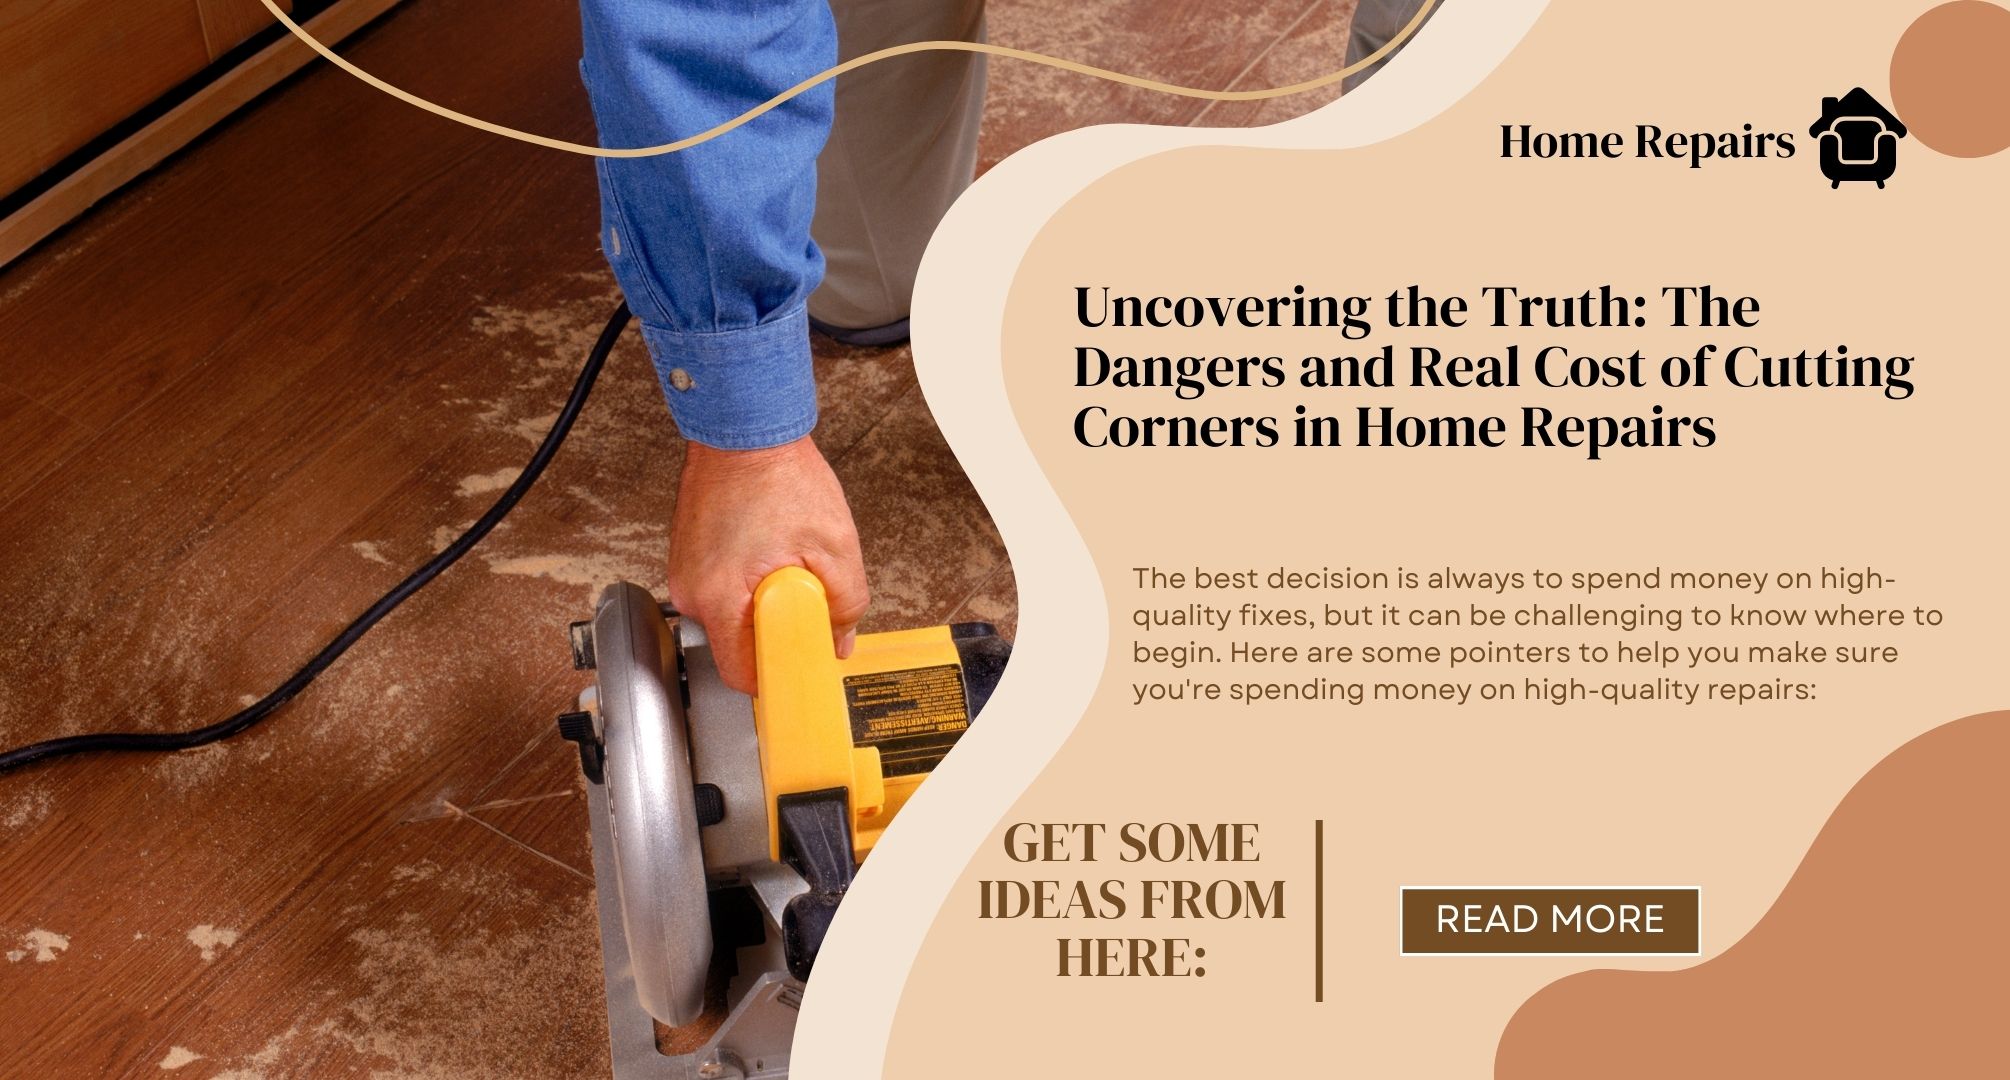 Uncovering the Truth: The Dangers and Real Cost of Cutting Corners in Home Repairs